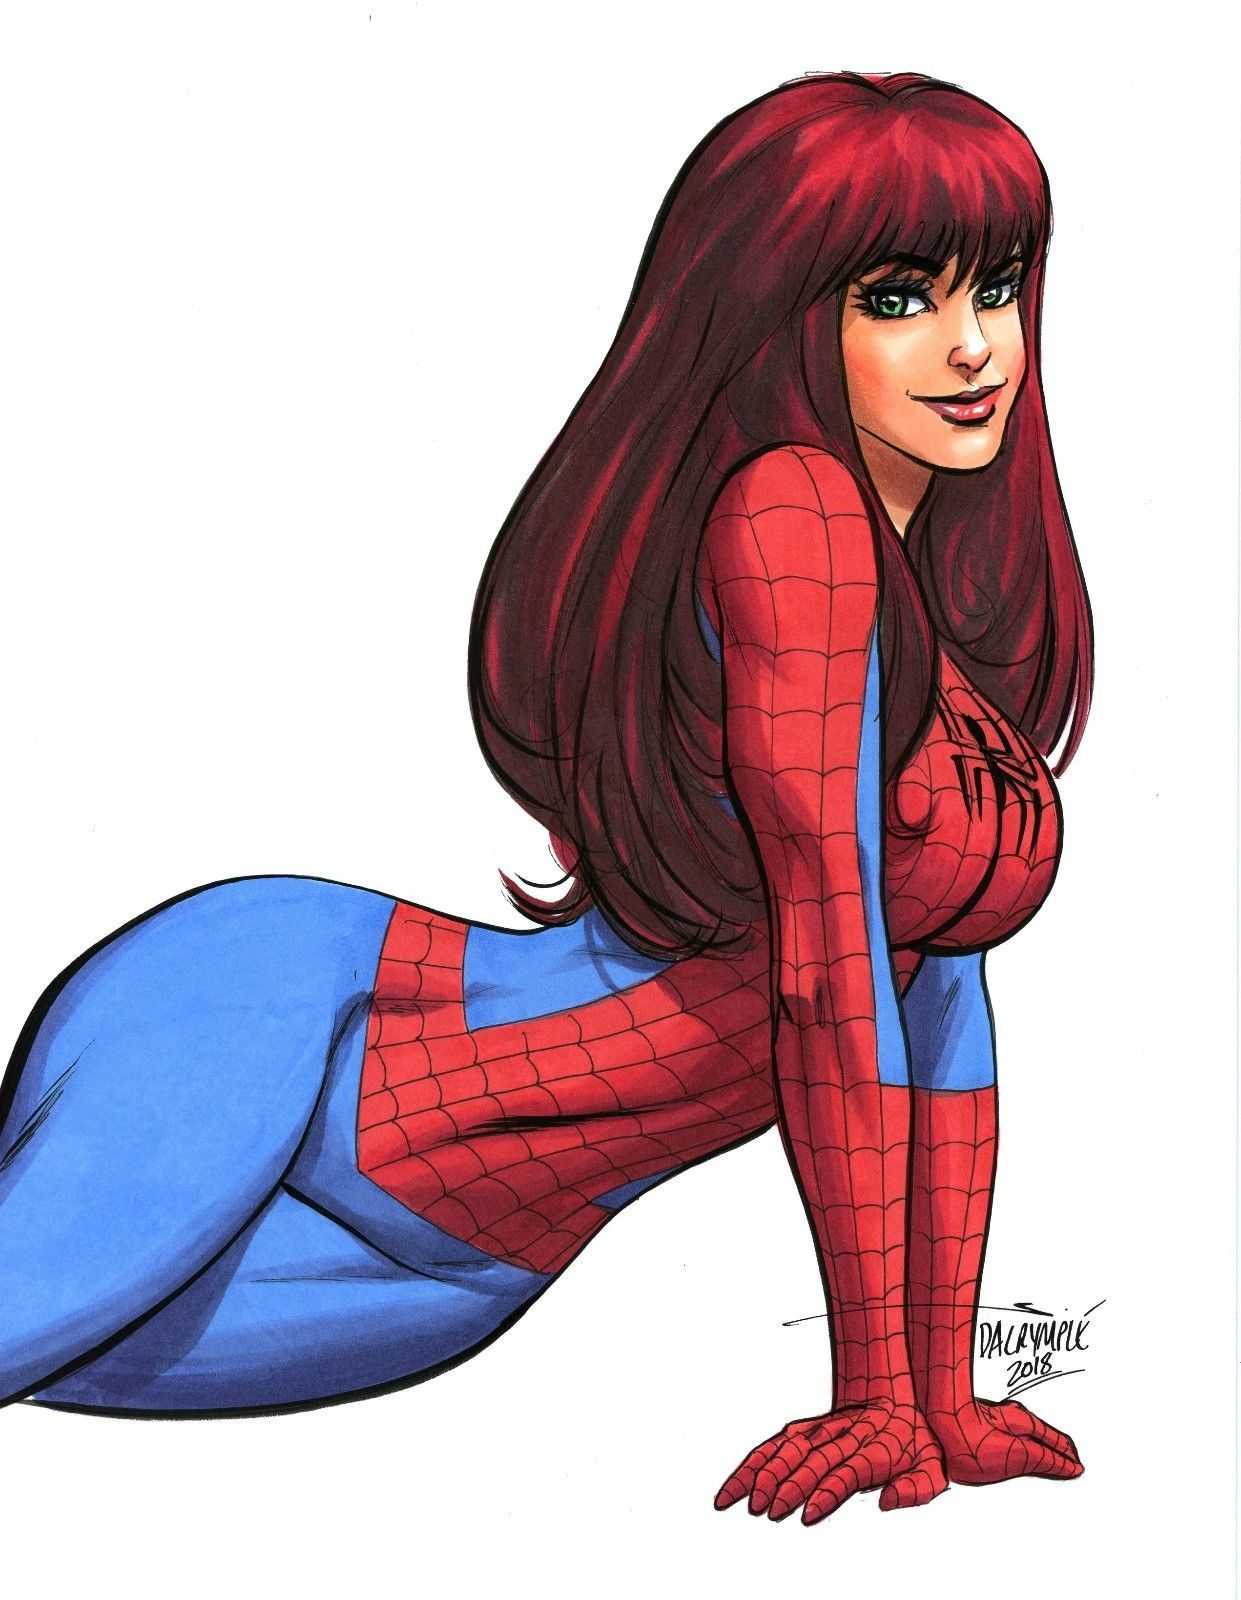 51 Hot Pictures Of Spider-Girl Are Windows Into Paradise 34